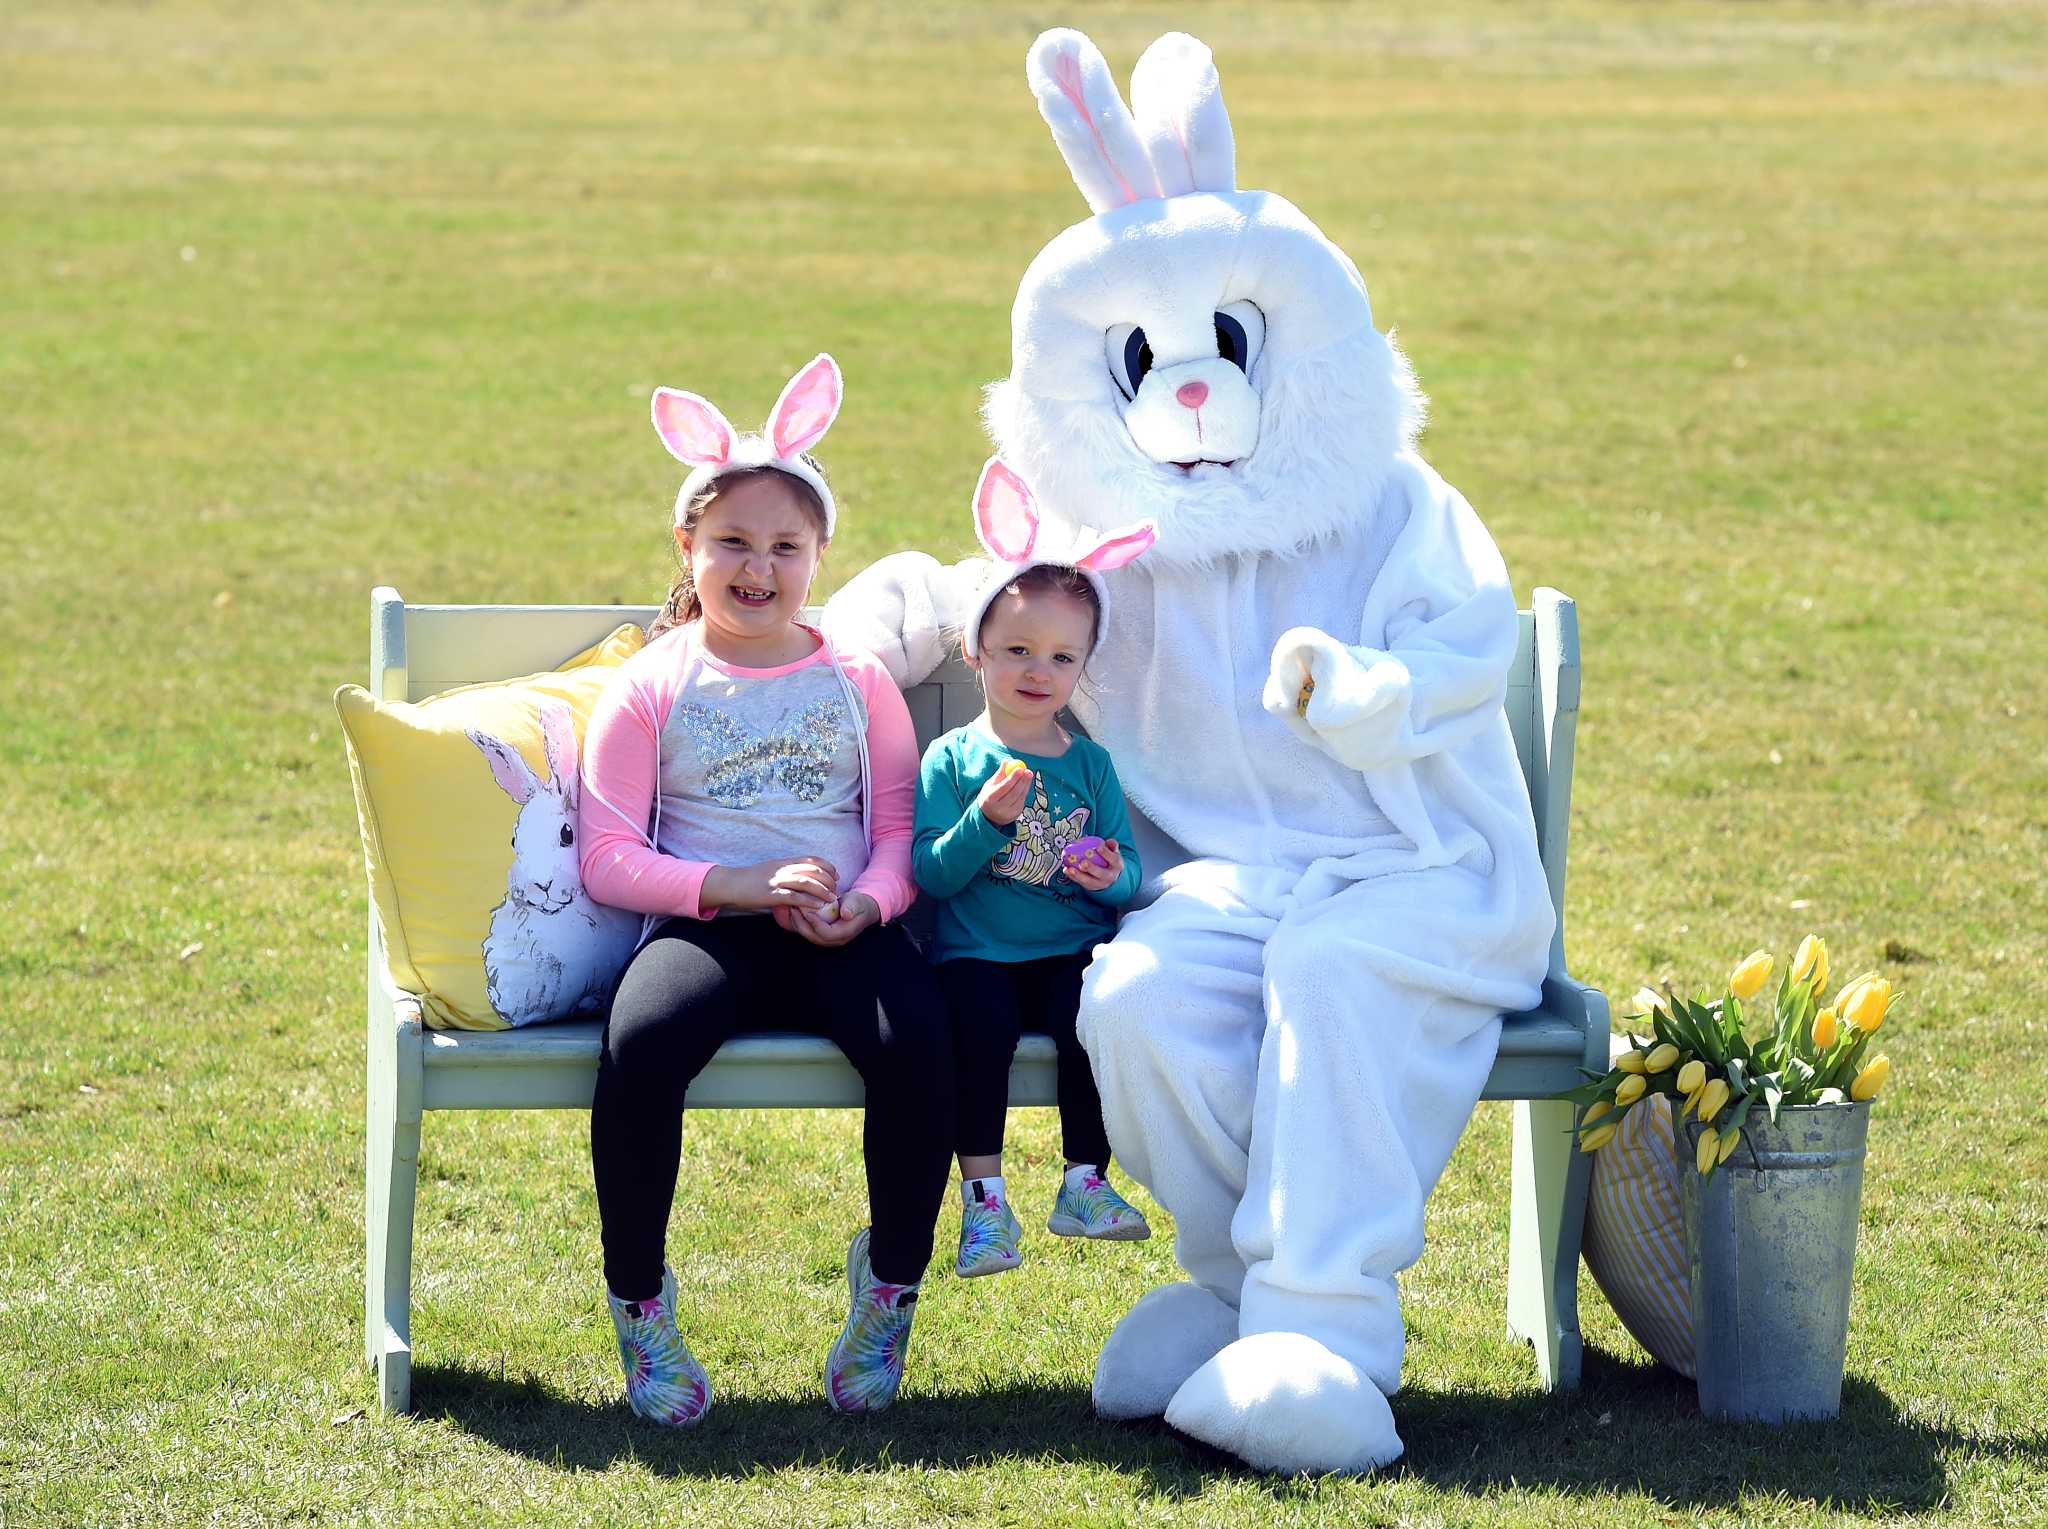 Where to take photos with the Easter Bunny around Connecticut